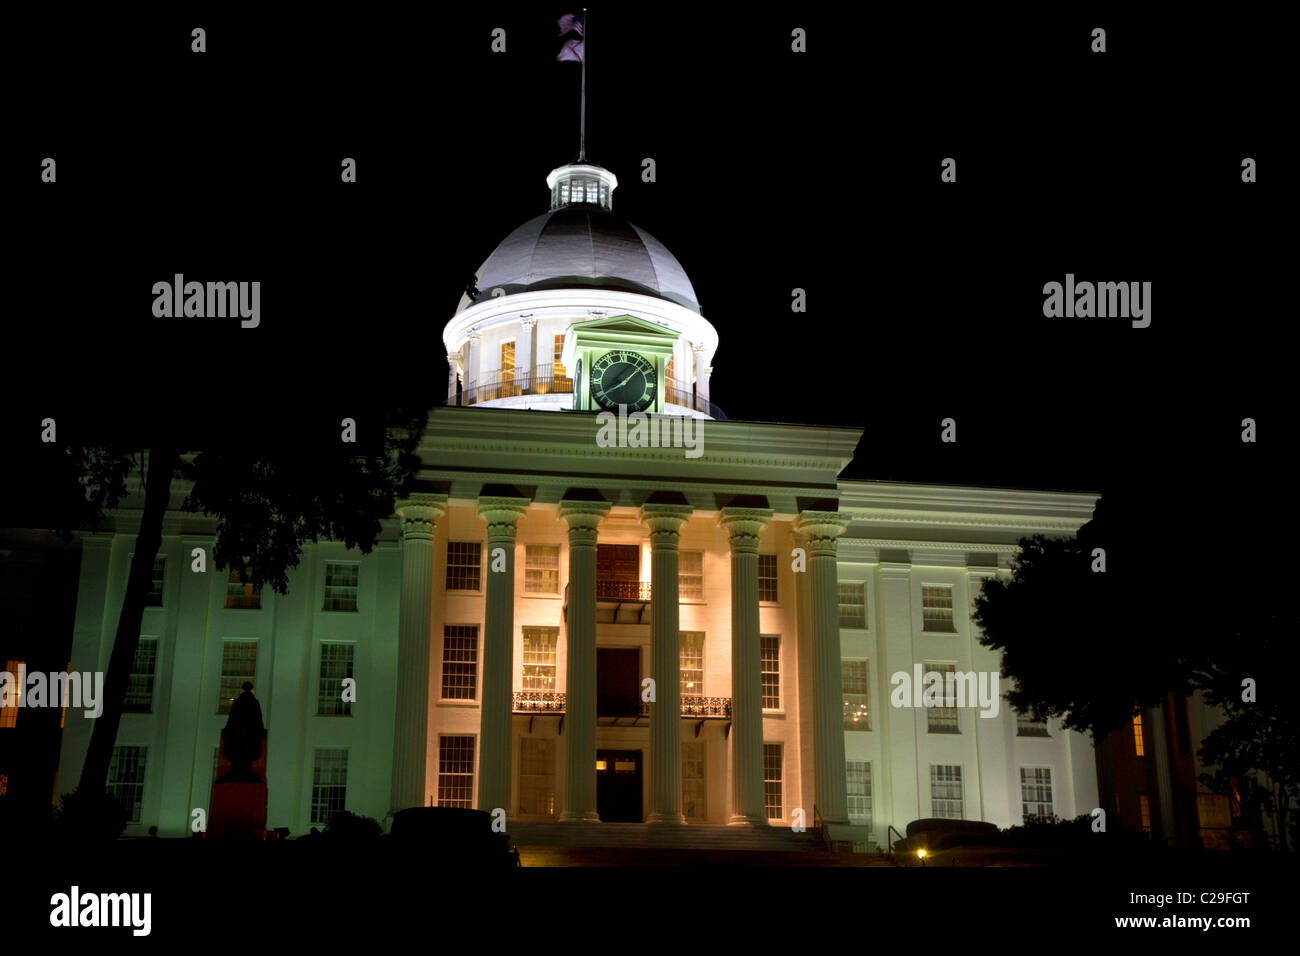 The Alabama State Capitol Building at night located on Goat Hill in Montgomery, Alabama, USA. Stock Photo